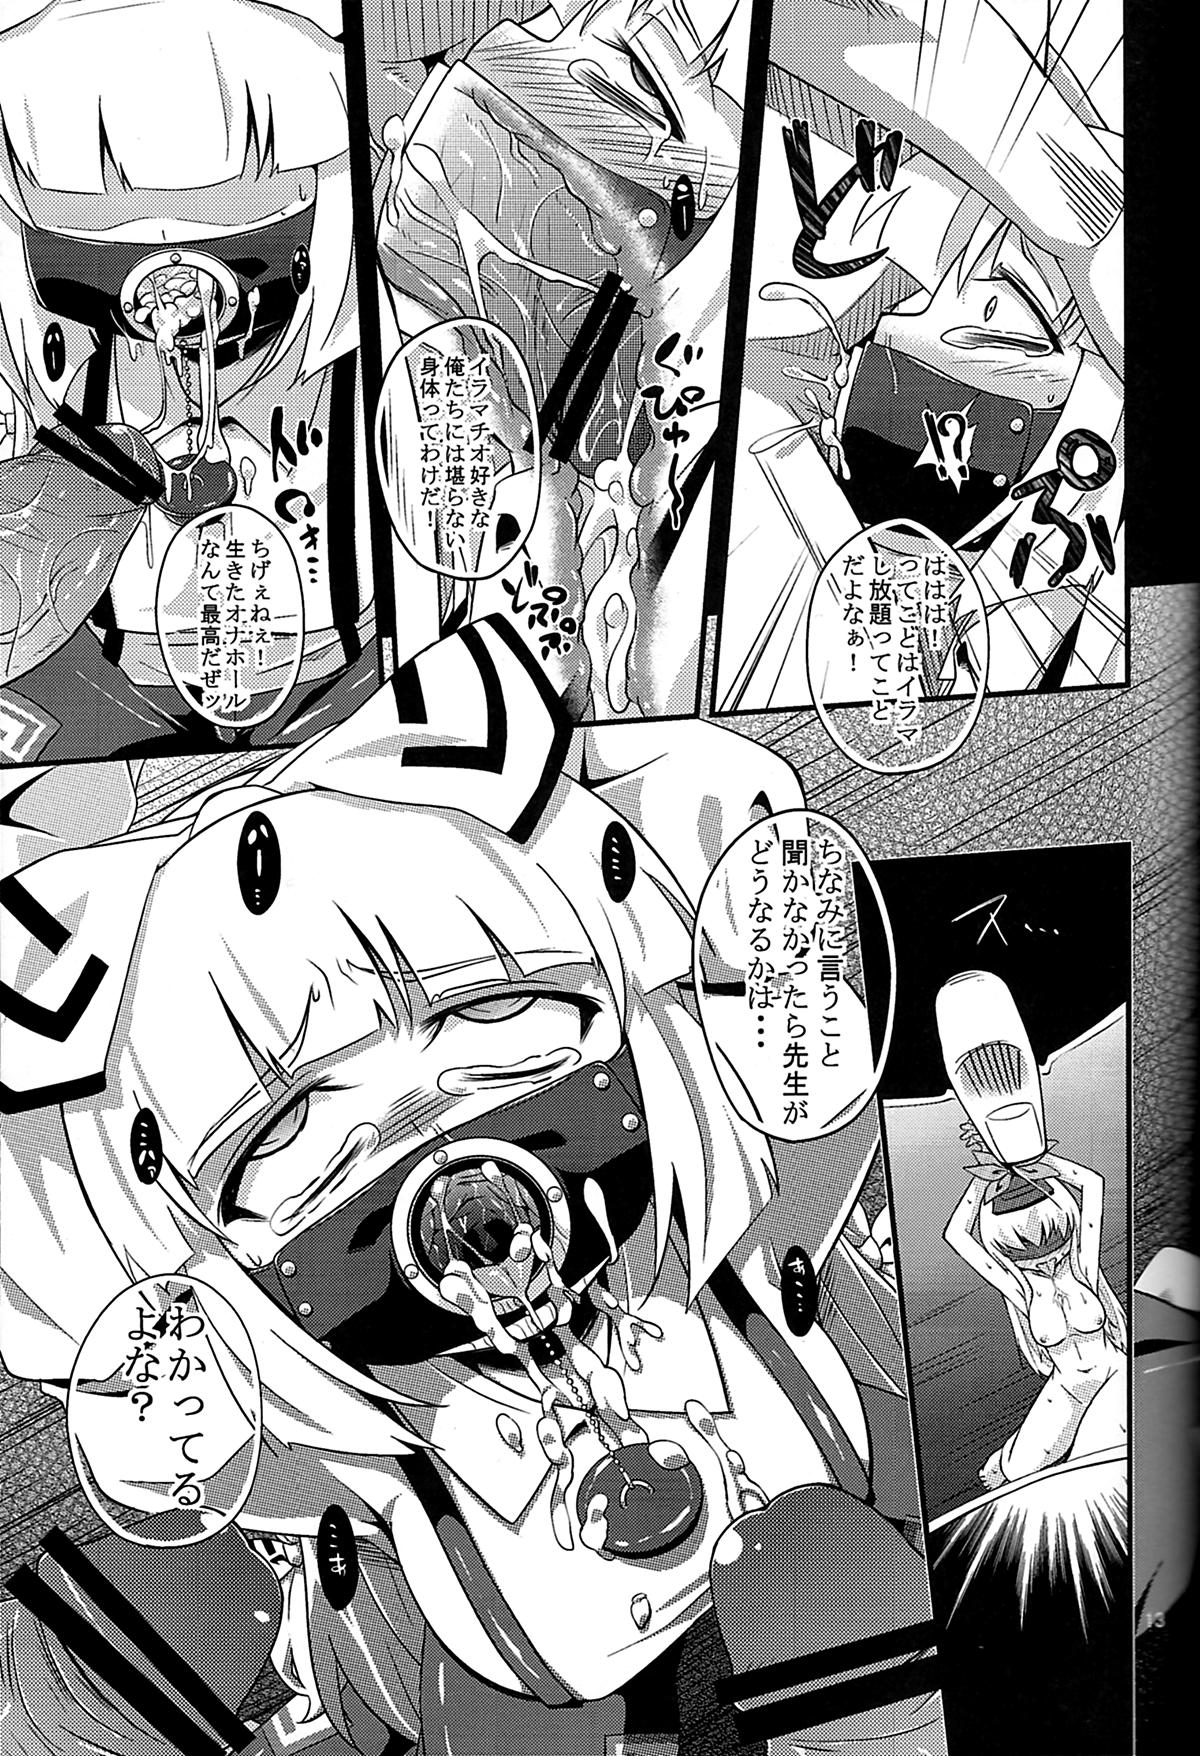 Humiliation (C80) [Happiness Milk (Obyaa)] -EternaL MoutH- (Touhou Project) - Touhou project Amateur - Page 12